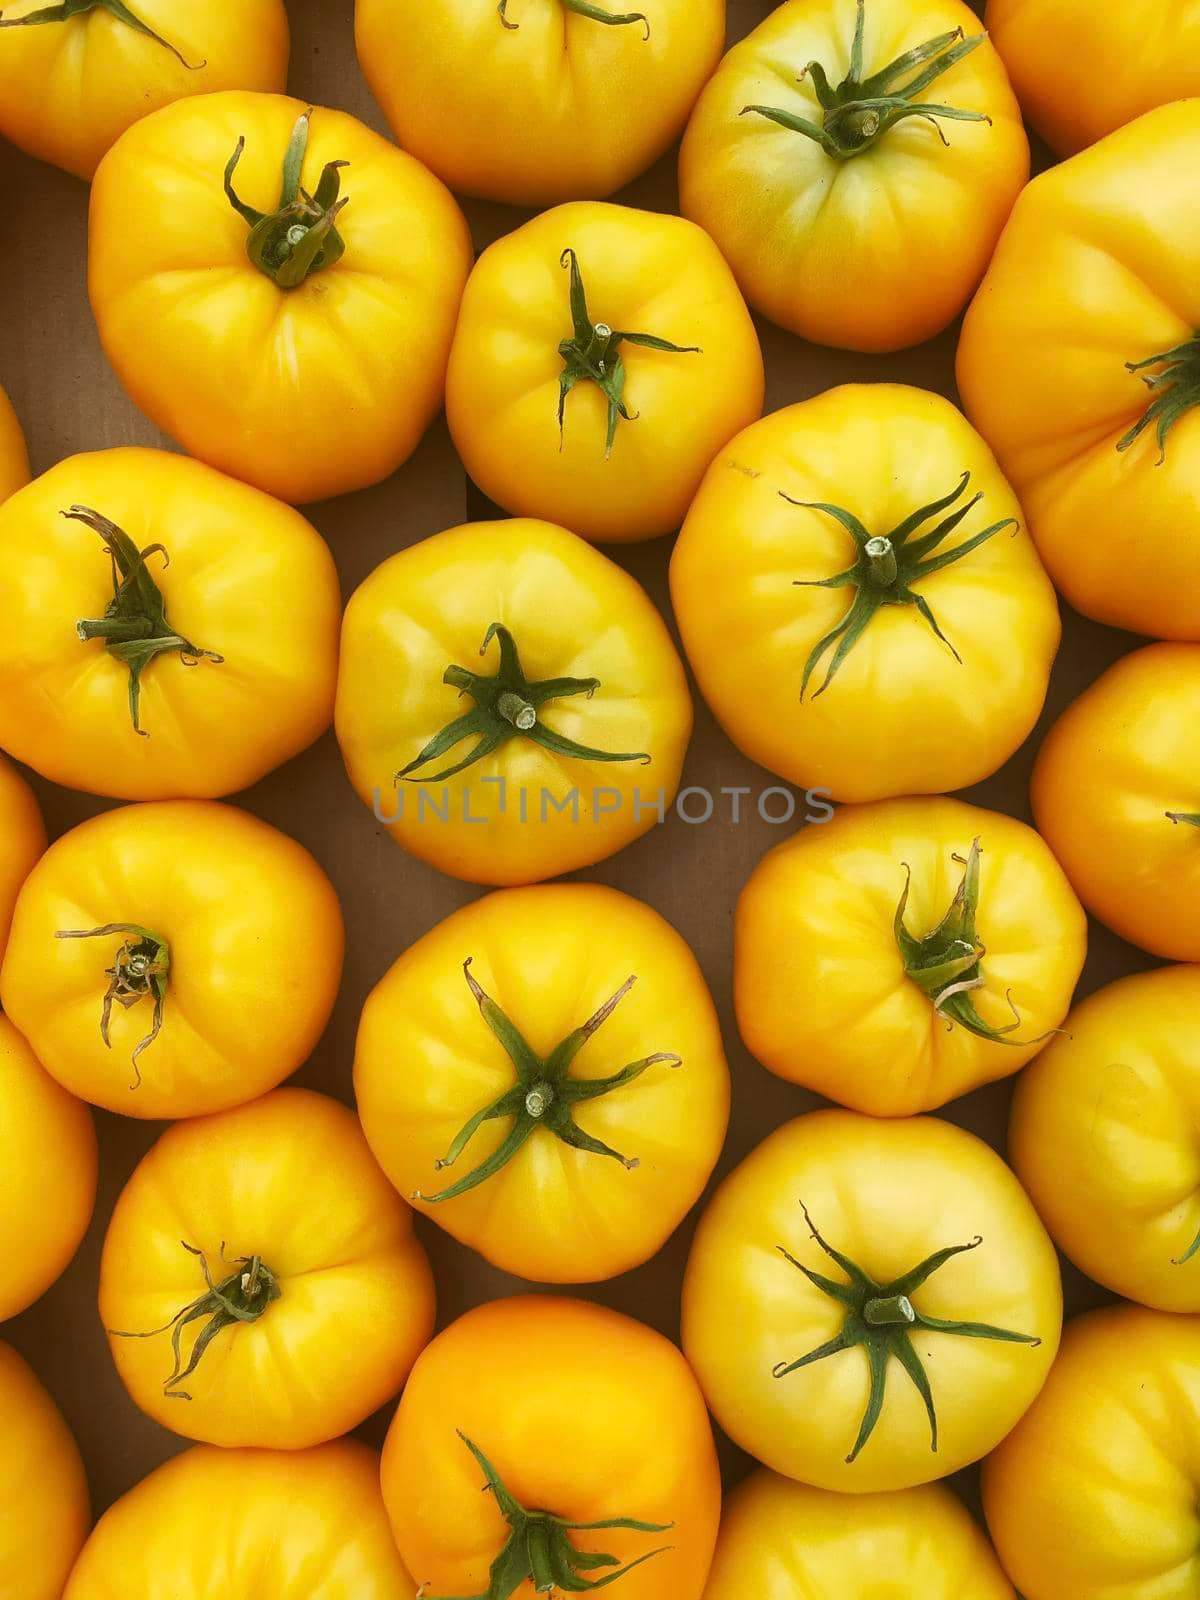 red and yellow tomatoes in boxes at the farmers market.selective focus.nature